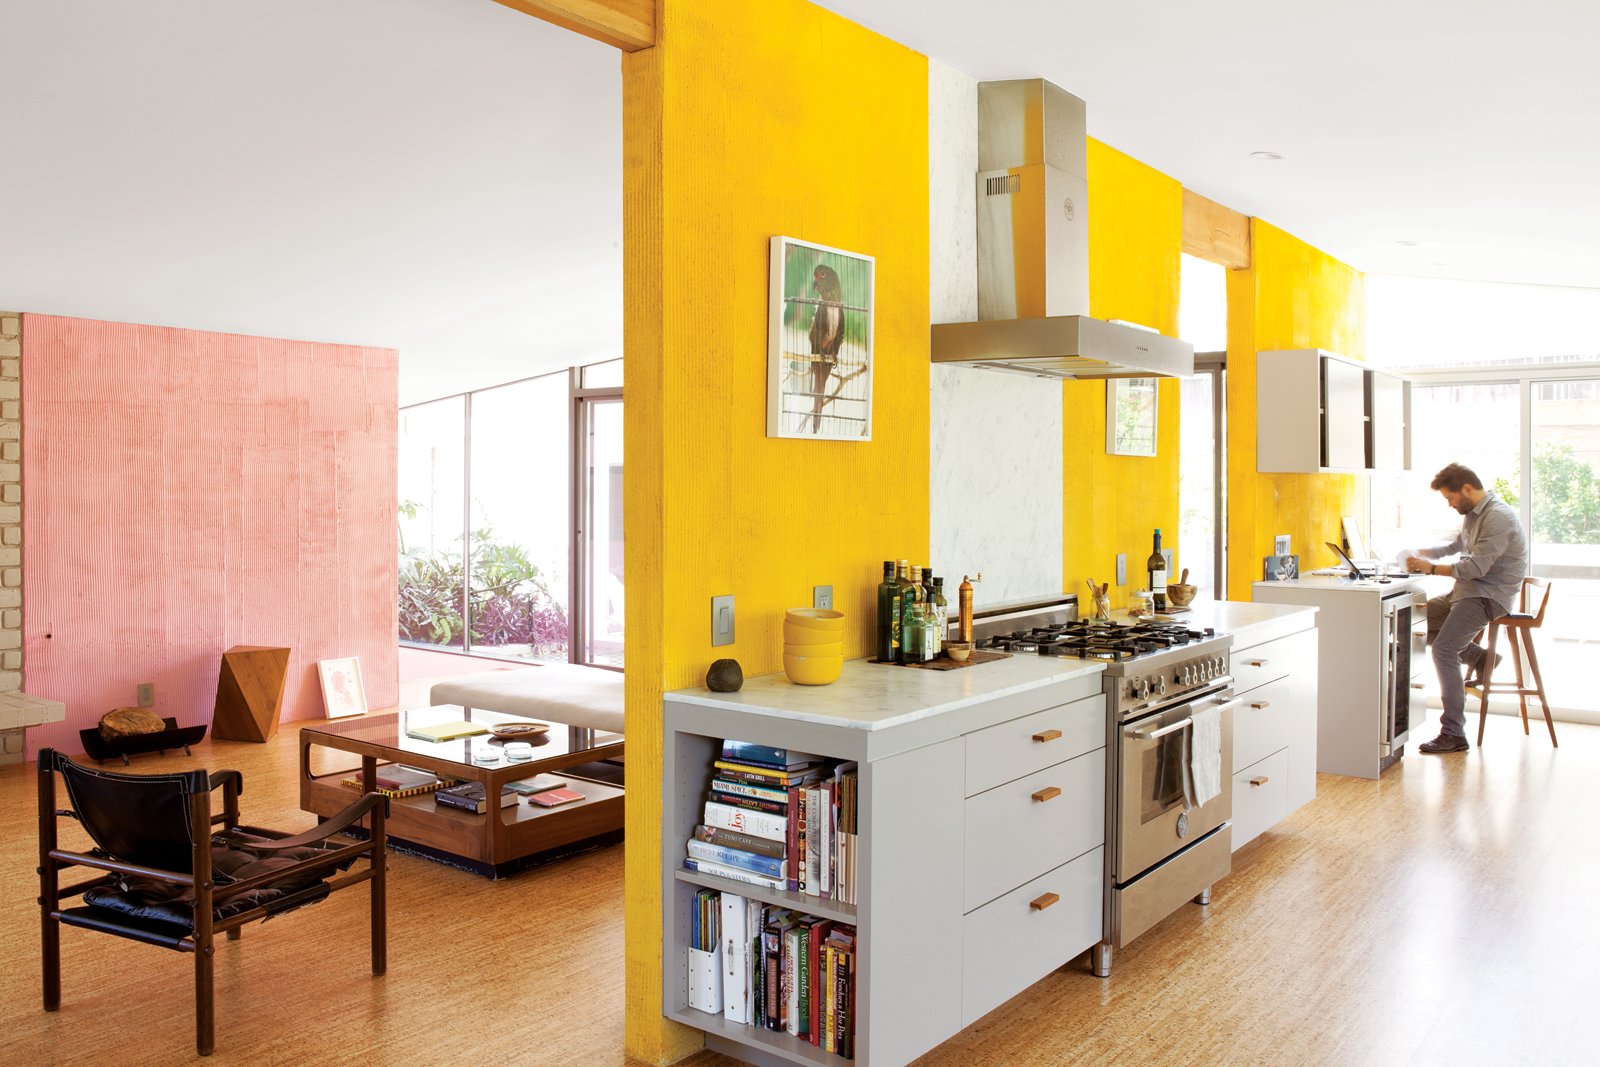 Benjamin Moore American Cheese and Blushing Bride Kitchen Pink and Yellow Color Scheme